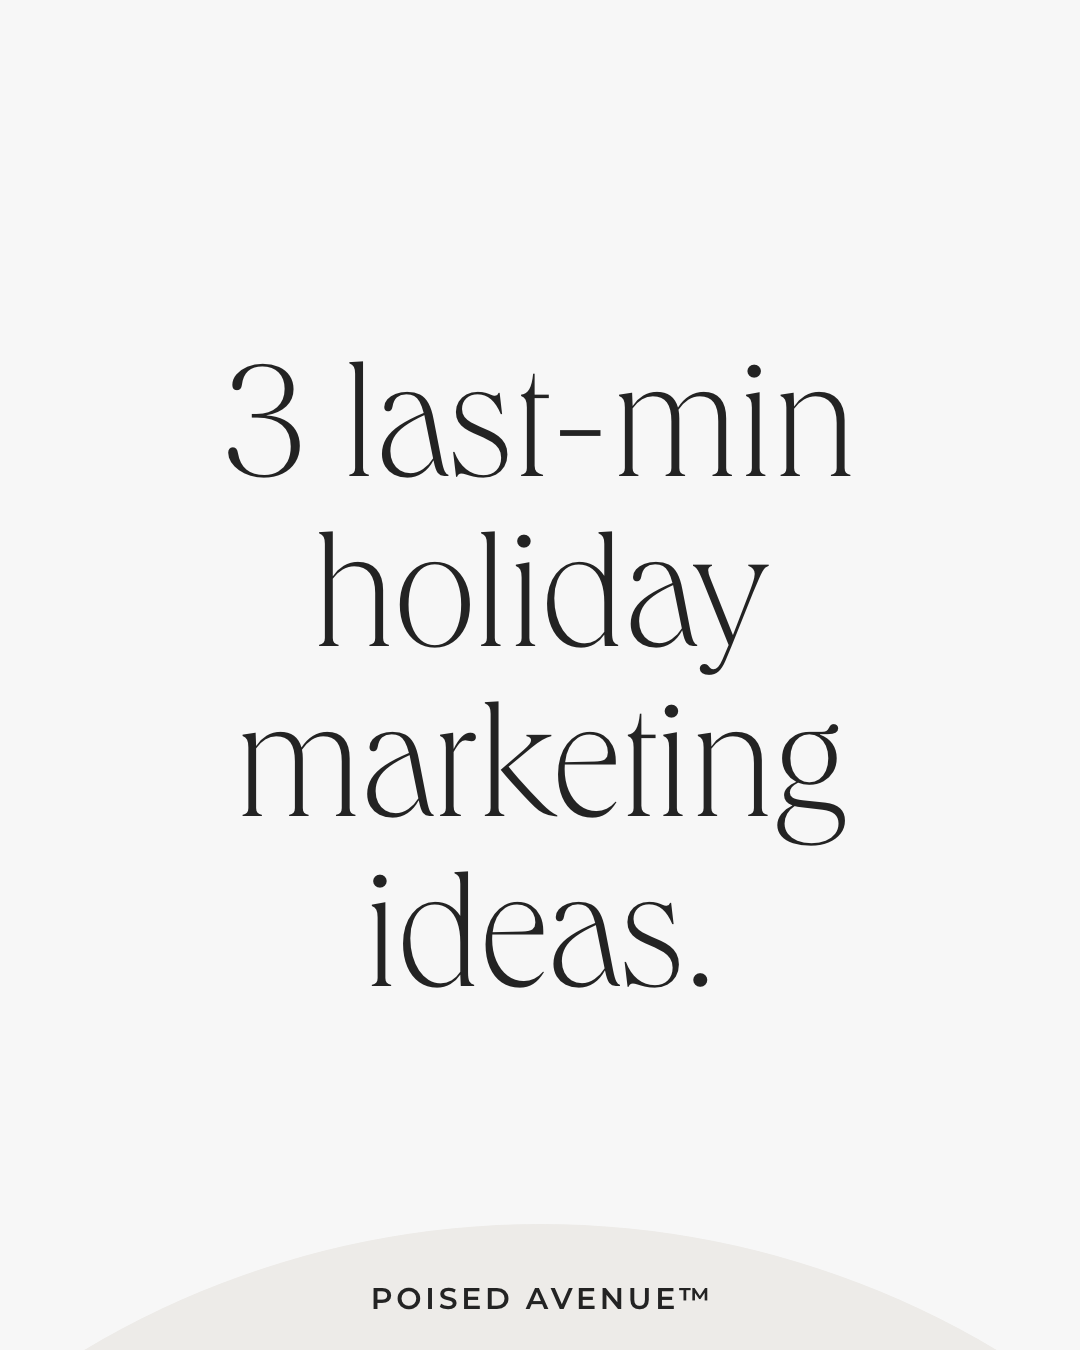 Last-minute holiday marketing ideas for small business owners by Amanda DeWoody of Poised Avenue Design Studio